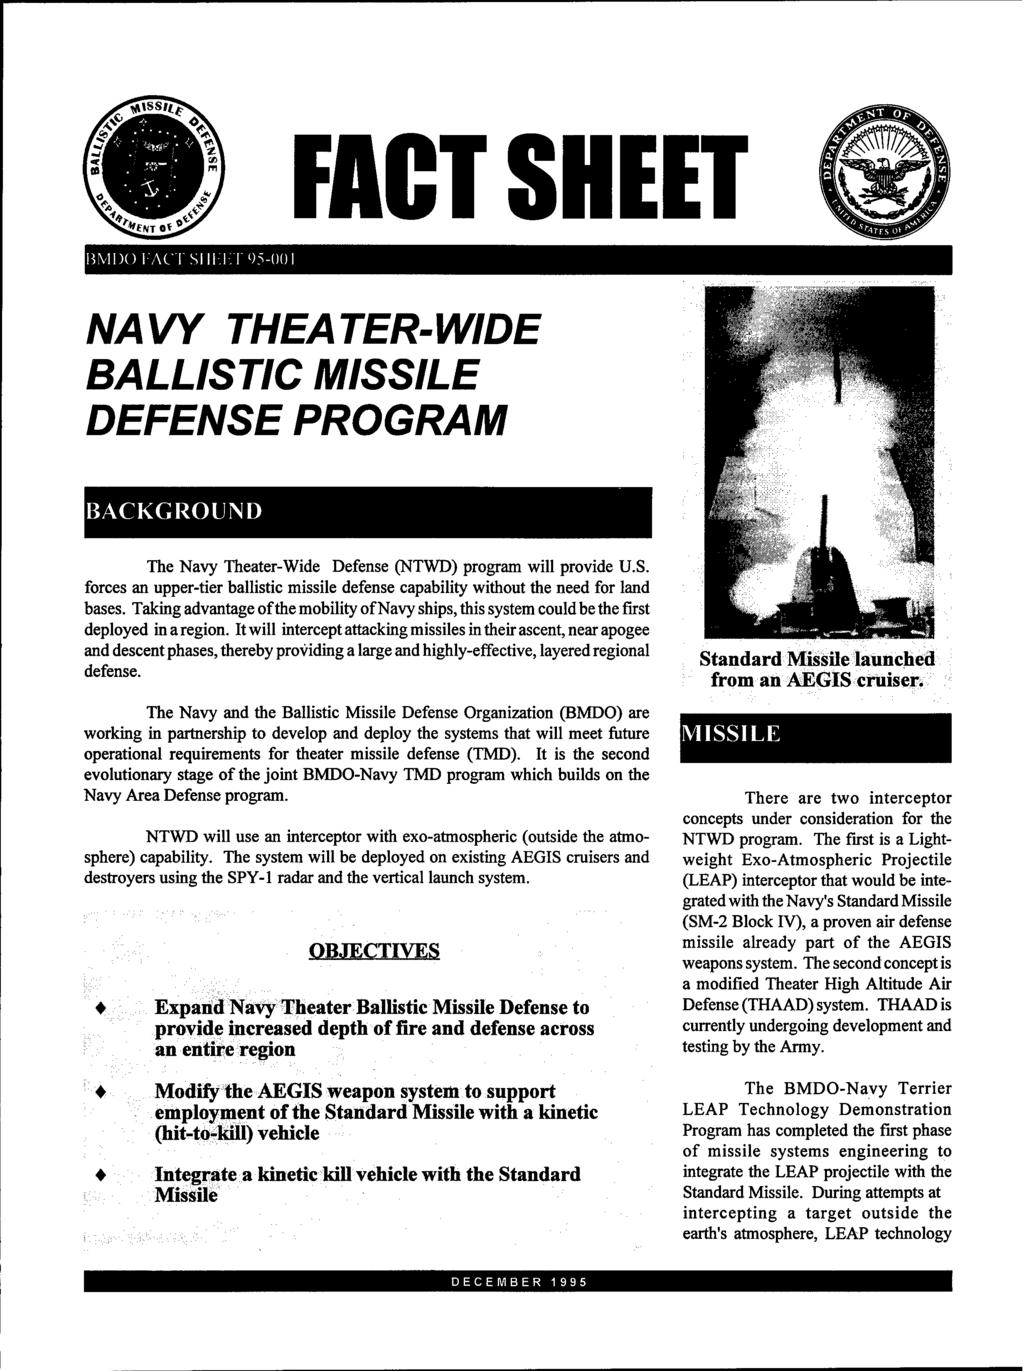 FACT SHEET ßMIX) l'ac :r')5-ooi NAVY THEATER-WIDE BALLISTIC MISSILE DEFENSE PROGRAM BACKGROUND The Navy Theater-Wide Defense (NTWD) program will provide U.S. forces an upper-tier ballistic missile defense capability without the need for land bases.